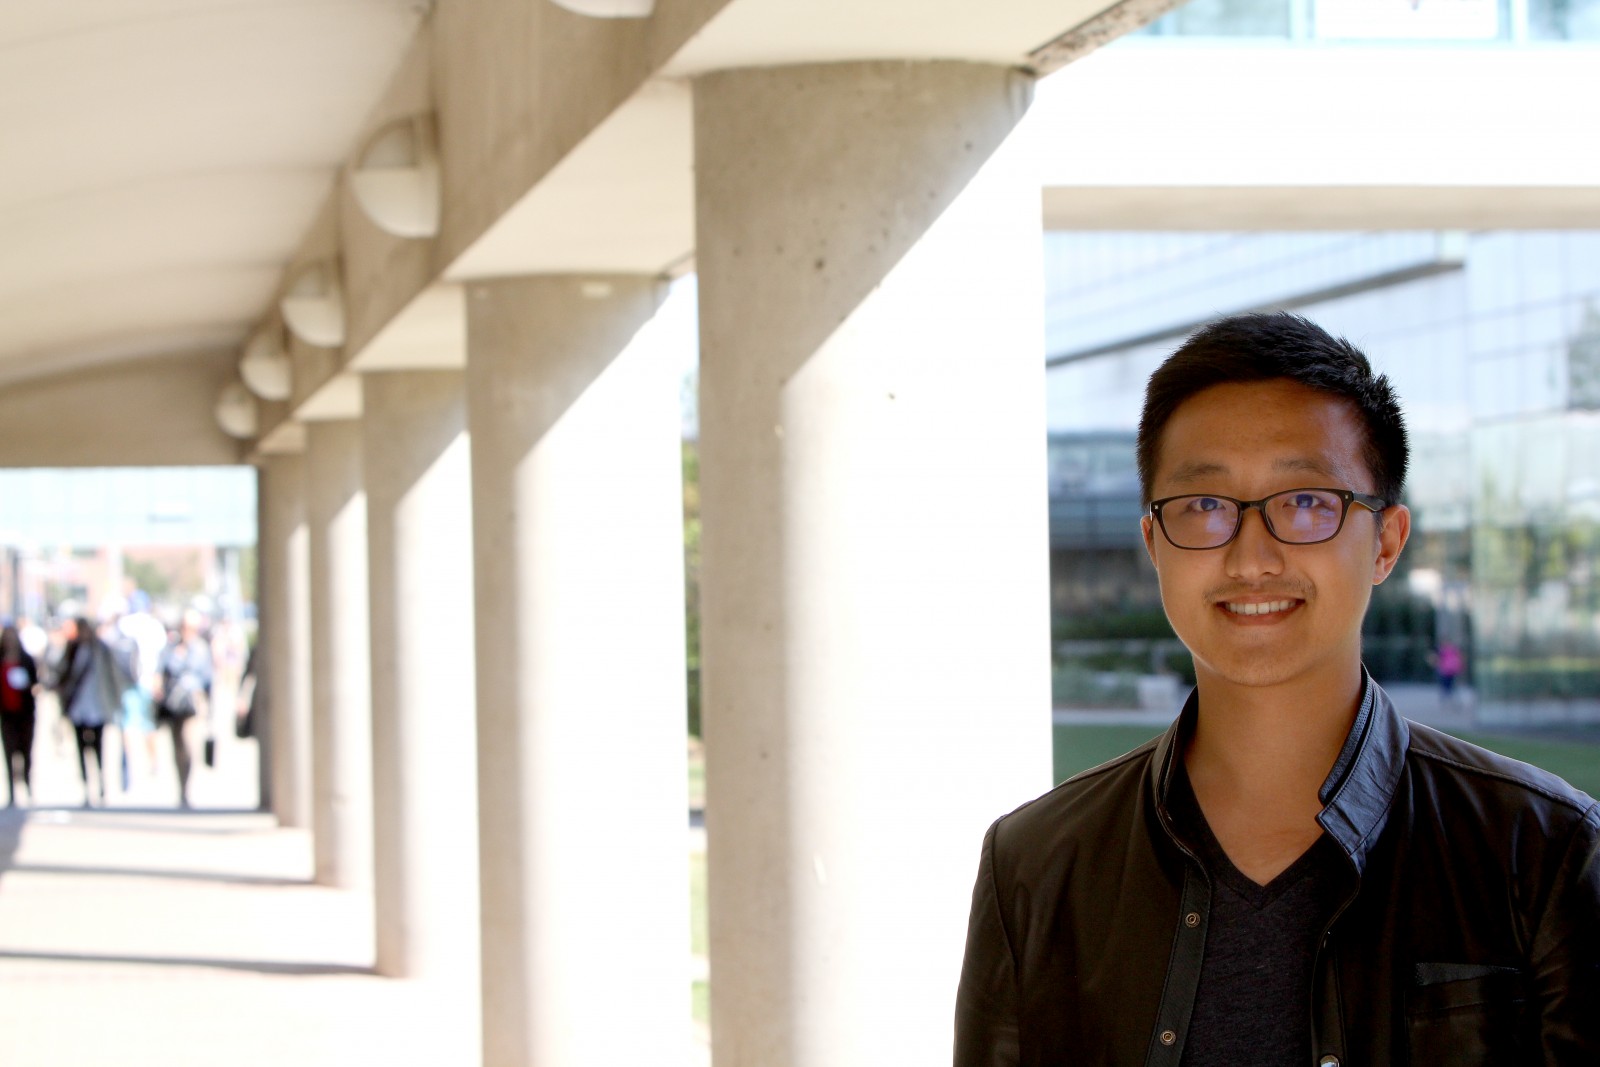 Chris Jia, a third-year student in the business administration program at the Goodman School of Business. He participated in the first round of the BioLinc Kick-starting Entreneurship program.